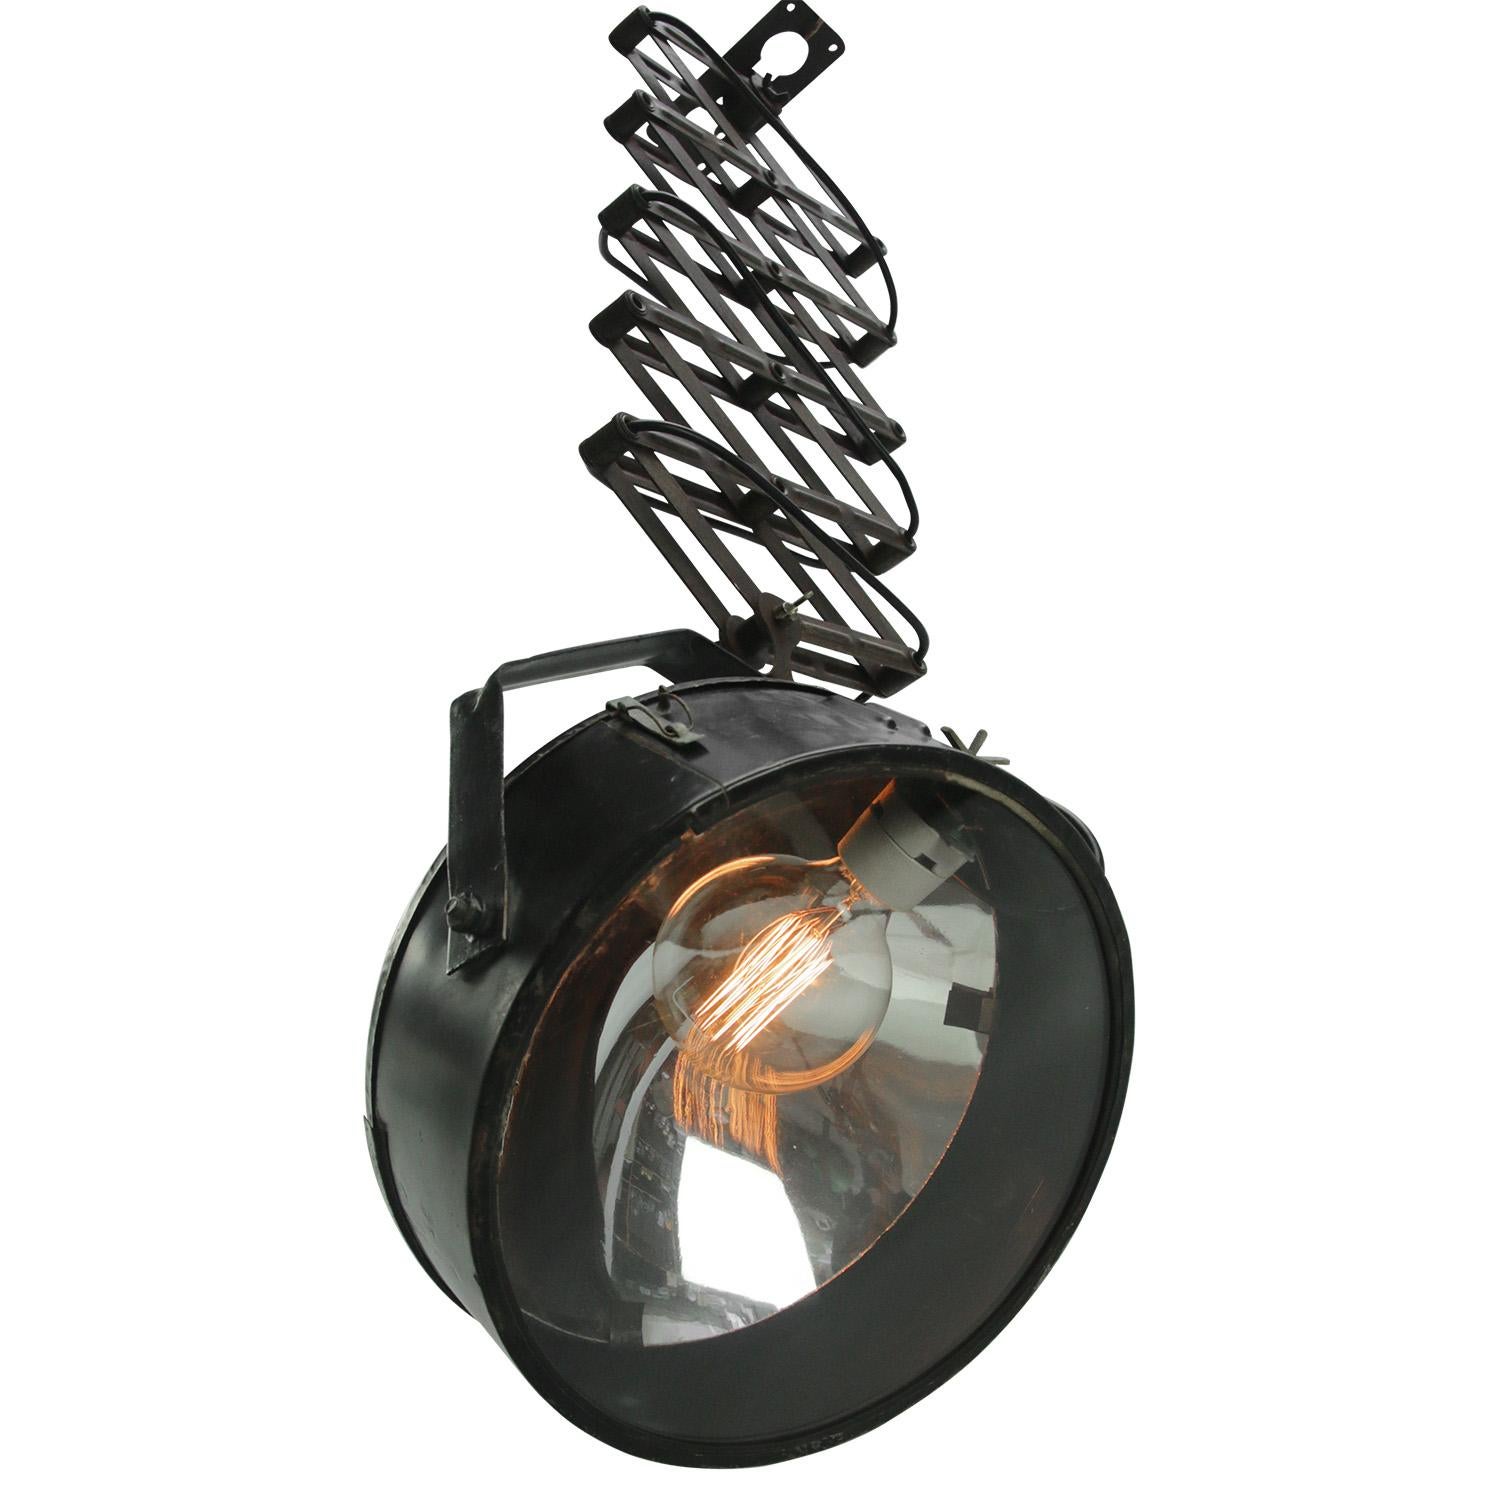 Double industrial metal scissor spring with voluminous spotlight
easy adjustable in height 
black metal, glass lens and mirror inside

Spotlight size: diam. 30 cm
90° angle adjustable shade

as shown on picture 109 cm
min. length 65 cm
max.